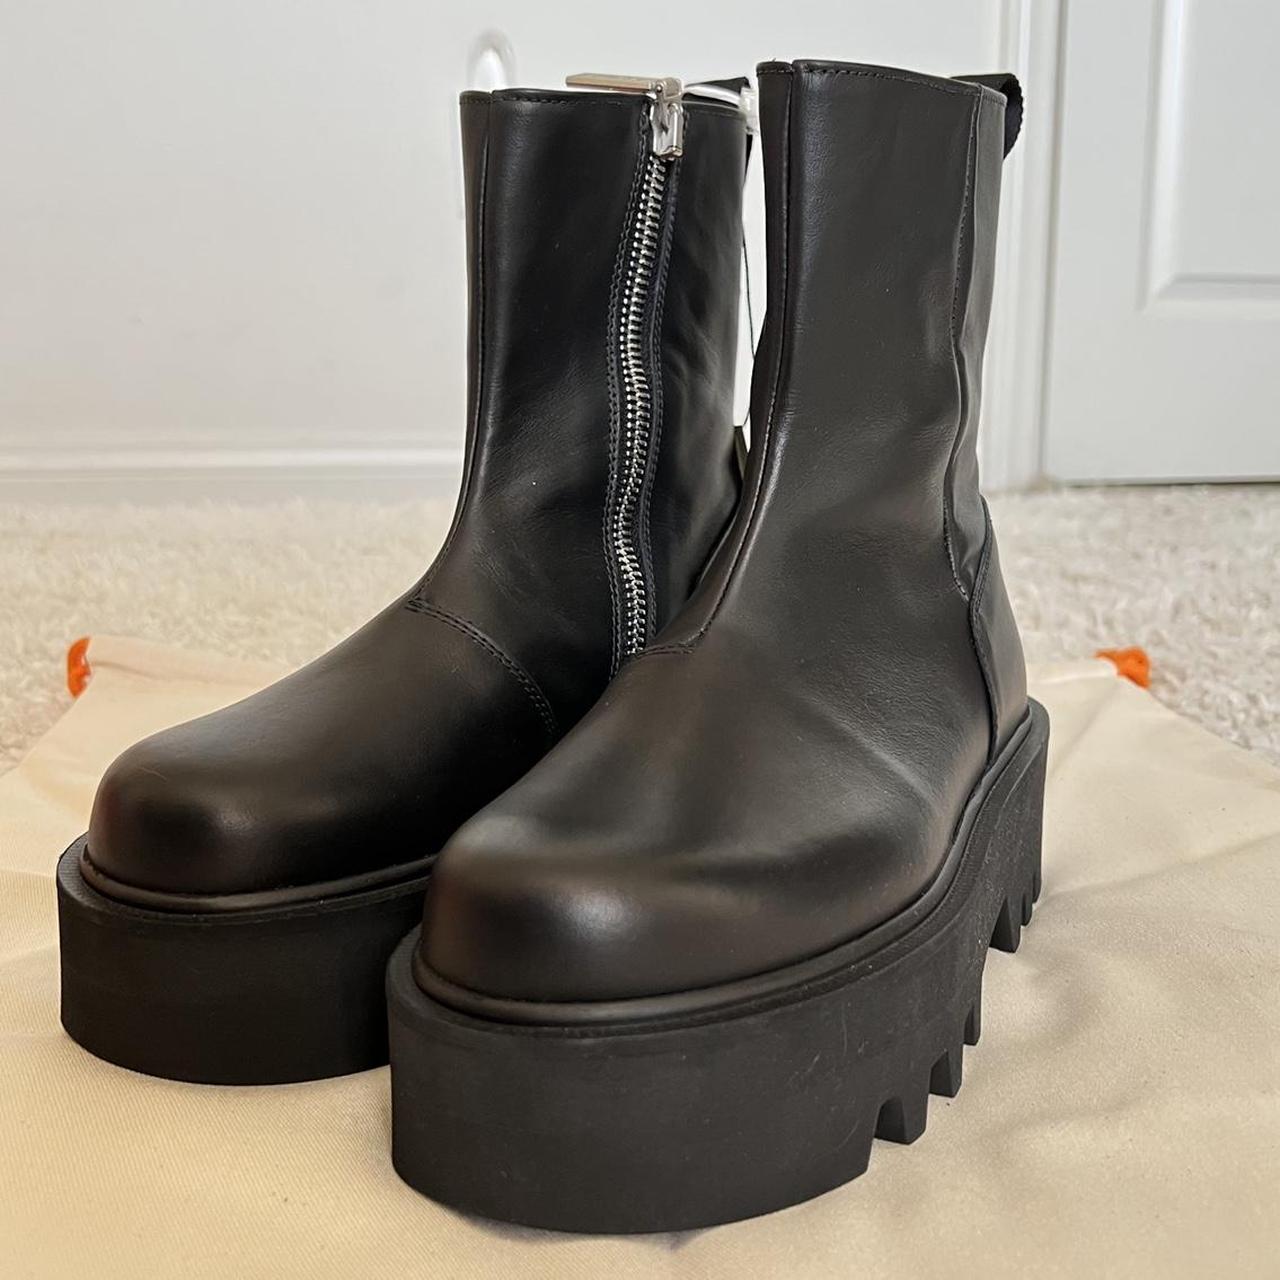 Product Image 2 - Heron Preston ankle boots
100% leather
Tried